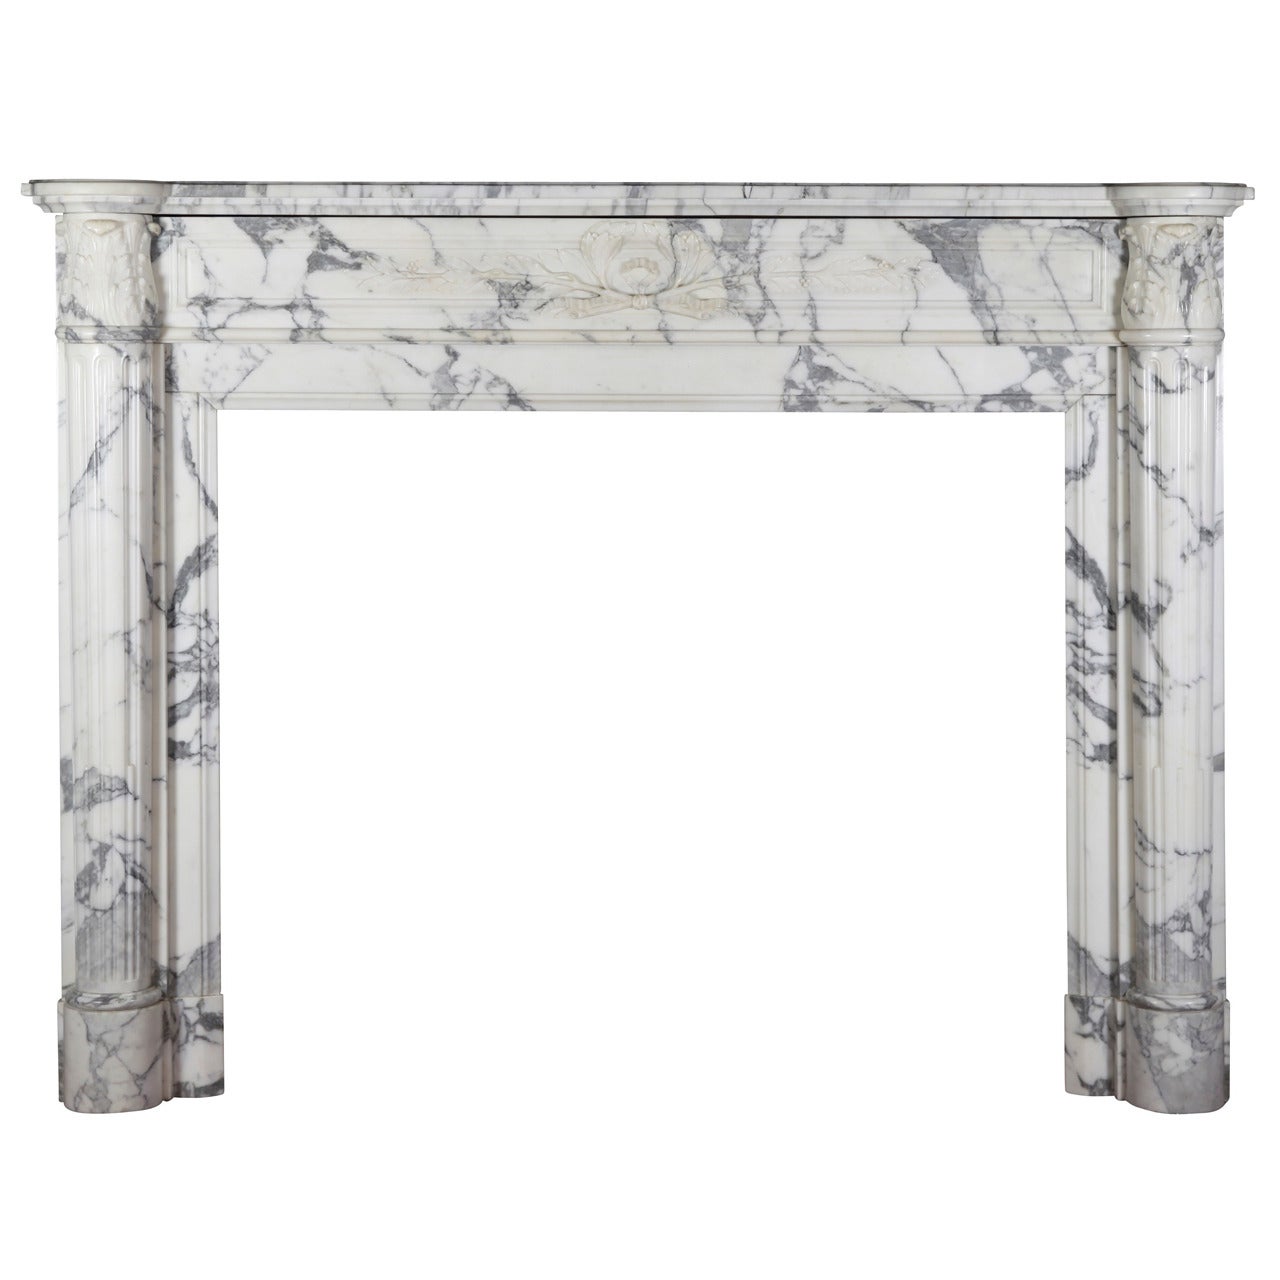 White Grand Interior Carrare Marble French Antique Fireplace Mantel